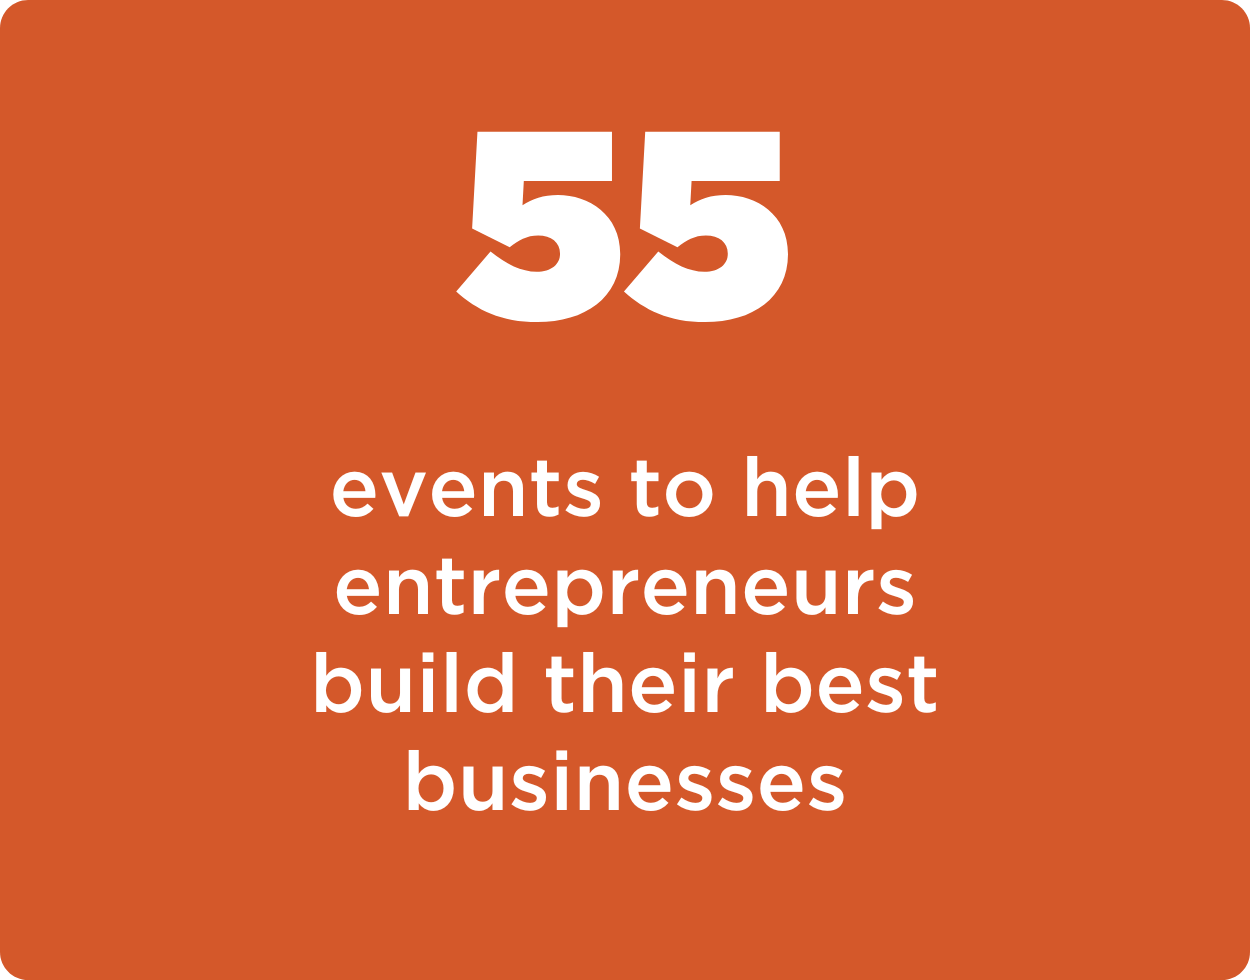 55 events to help entrepreneurs build their best businesses